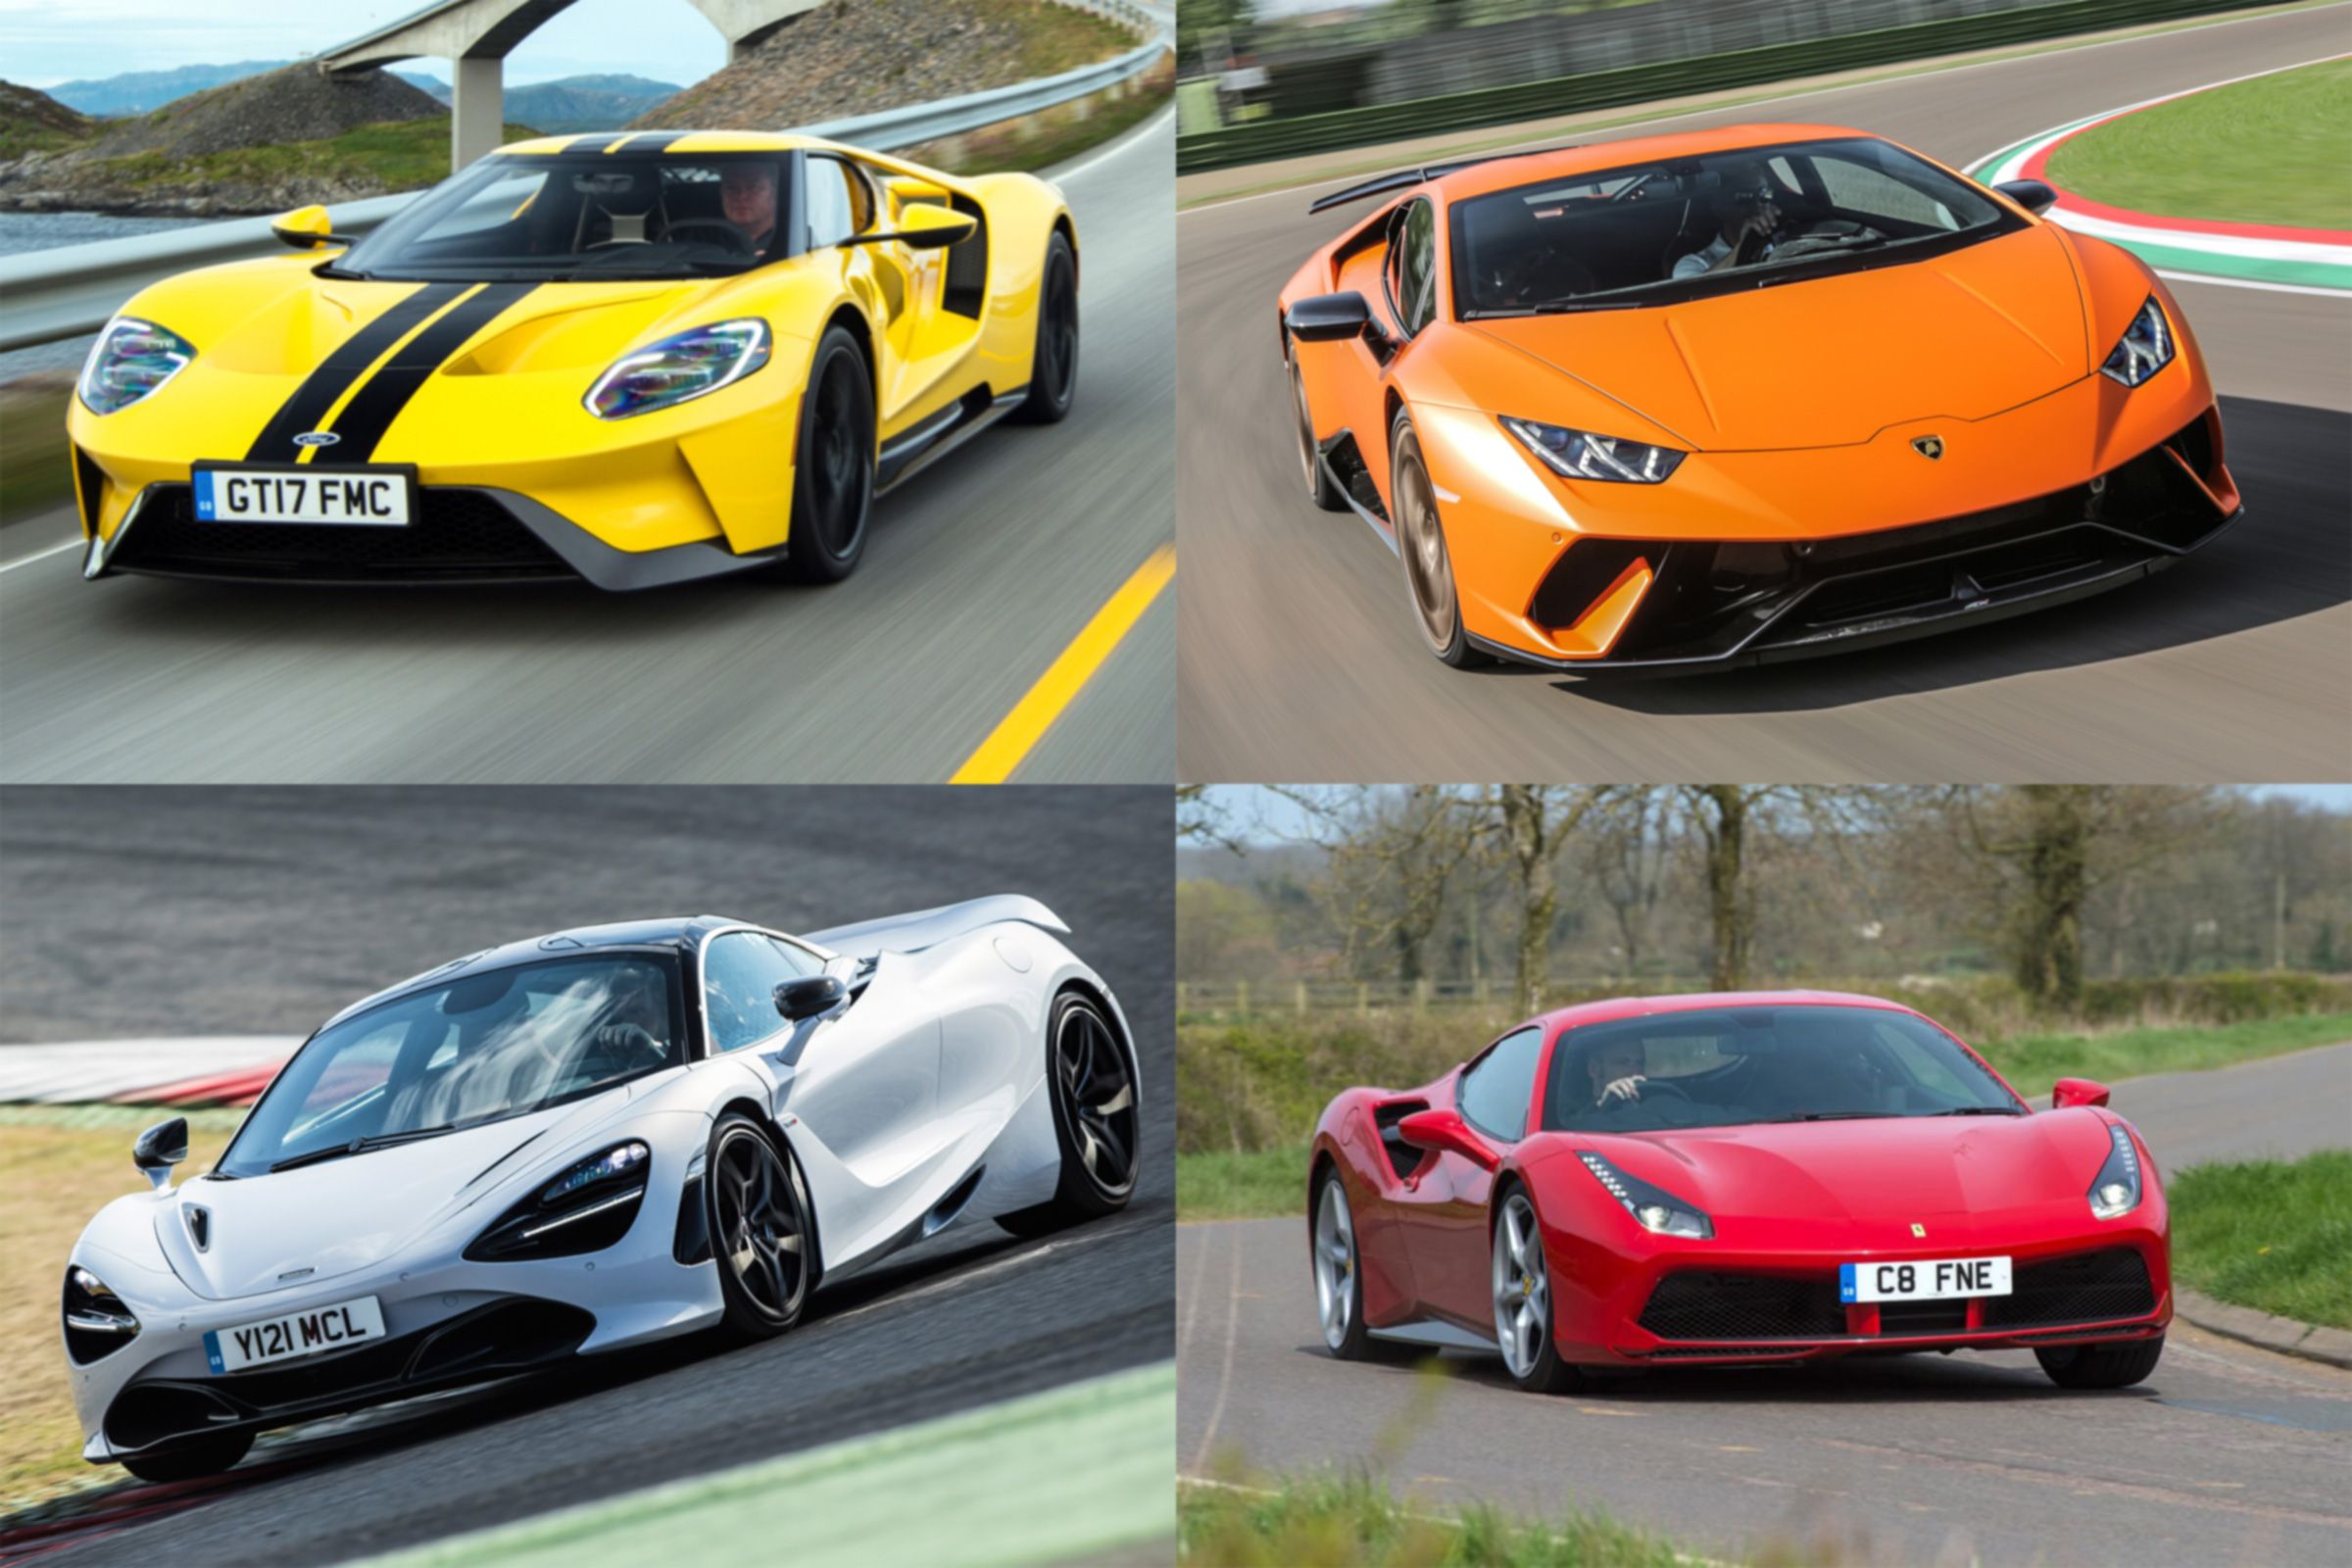 Top supercars in the class